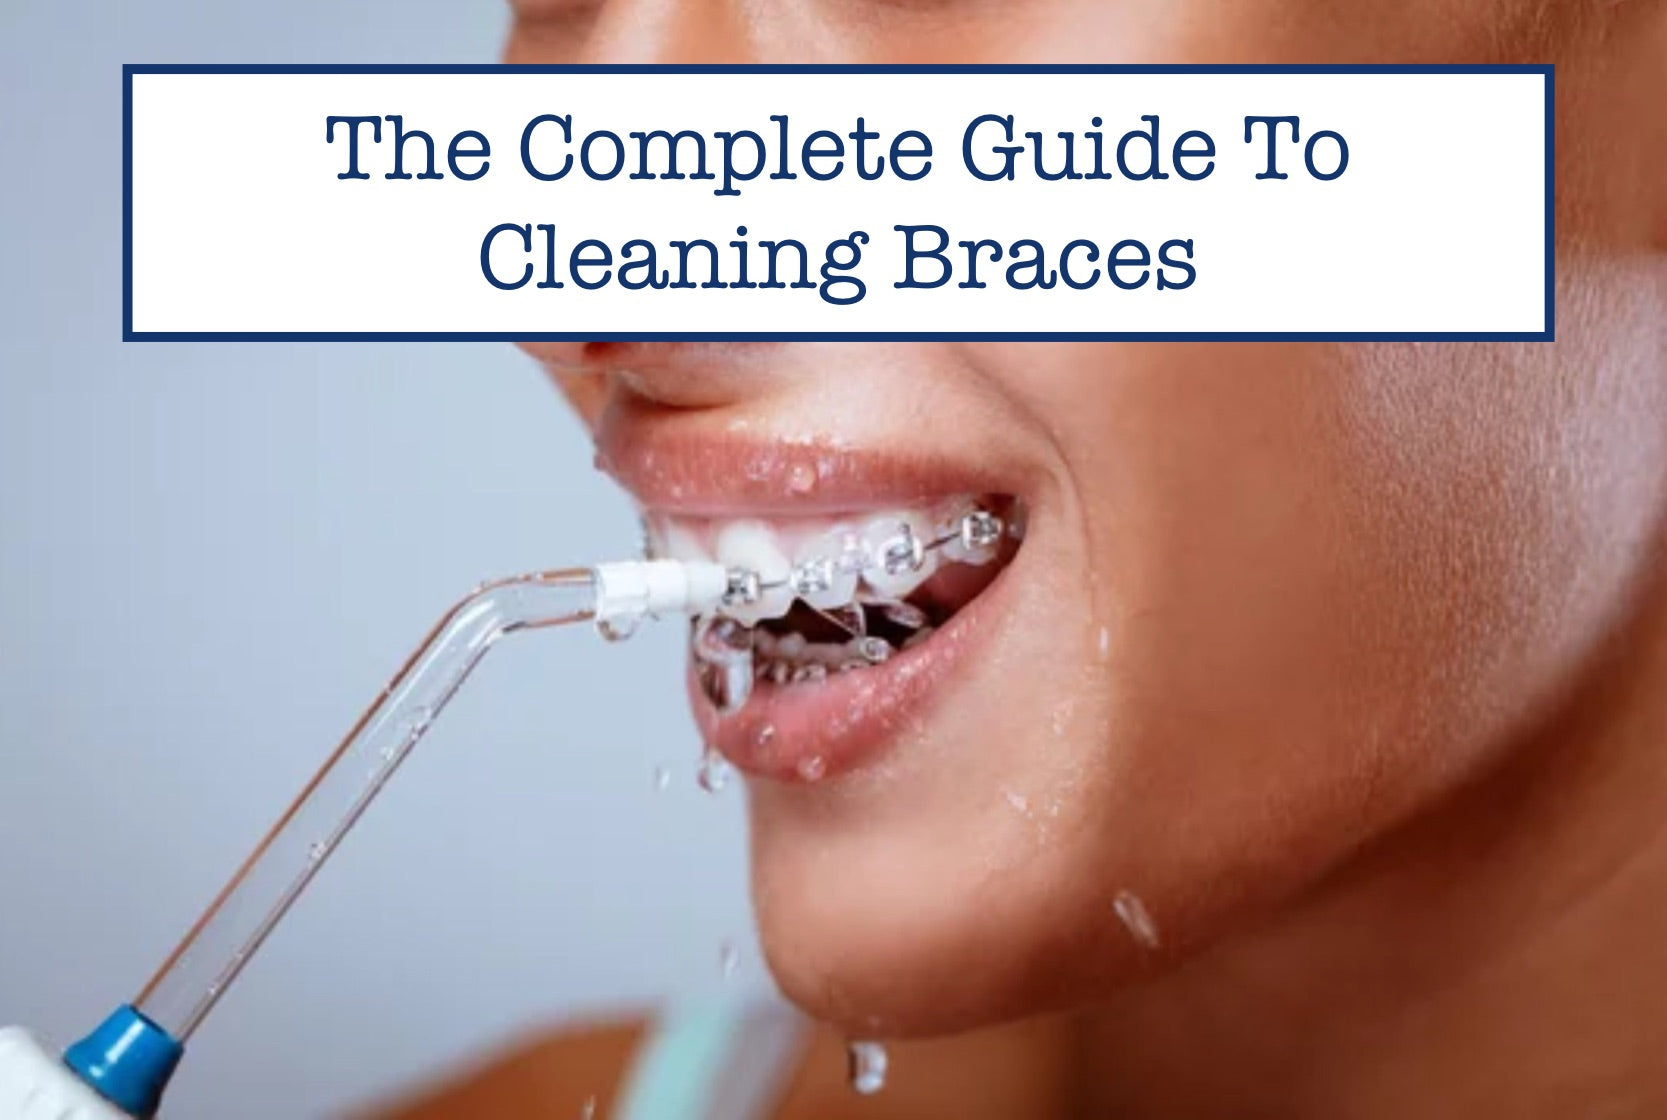 The Complete Guide To Cleaning Braces